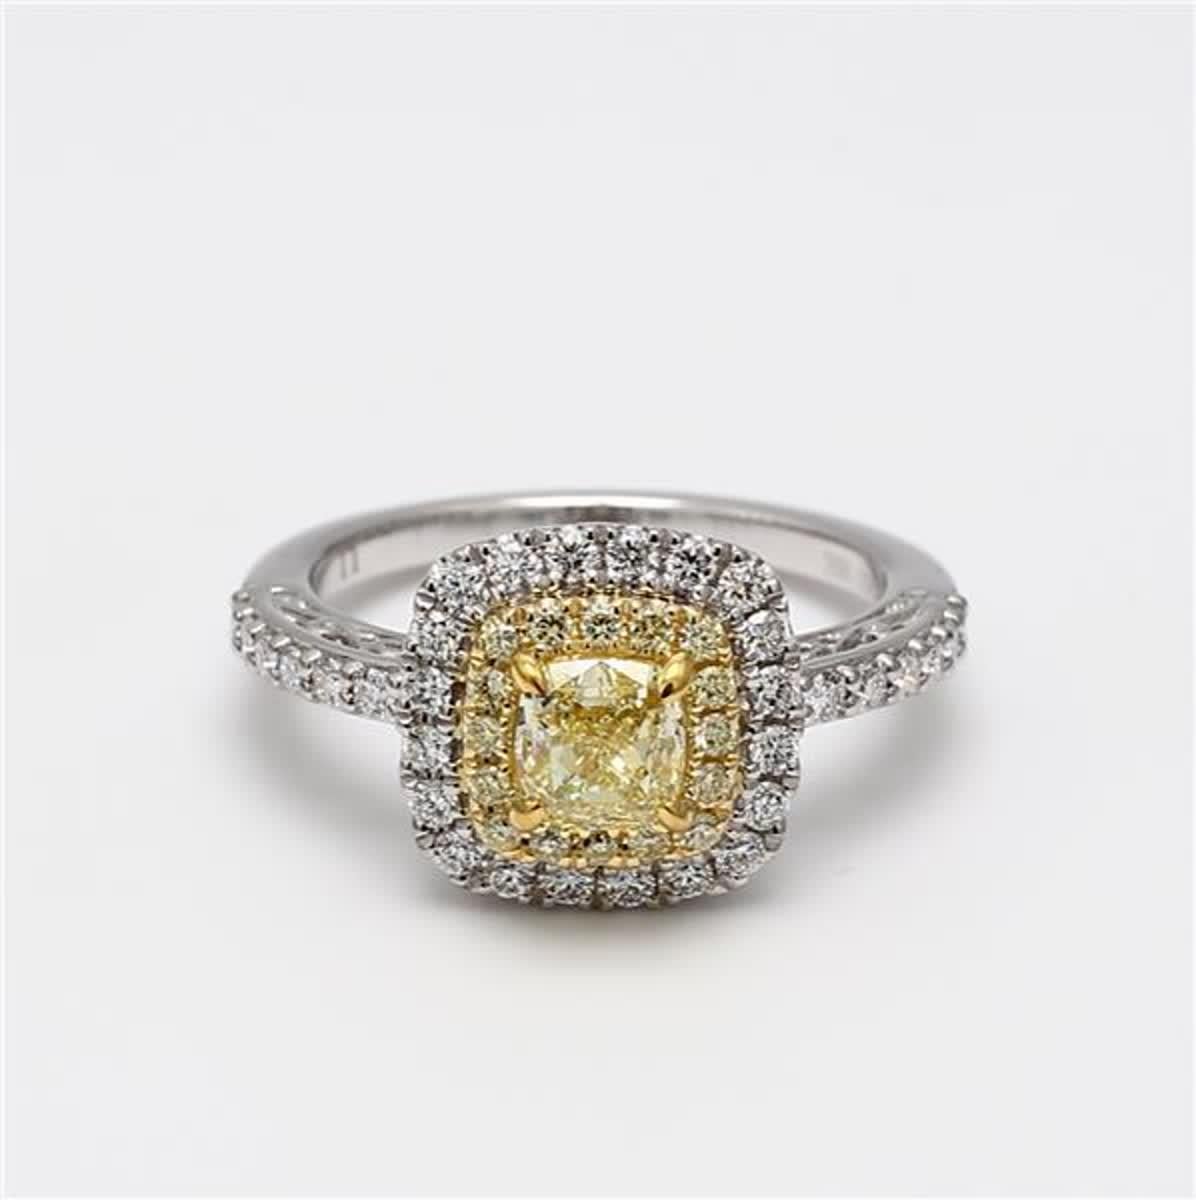 GIA certified rare square cushion natural yellow diamond surrounded with natural round white and yellow diamonds. This ring is designed to be in a simple setting. Can be used as a cocktail ring or in addition to your collection of jewels. 

Total